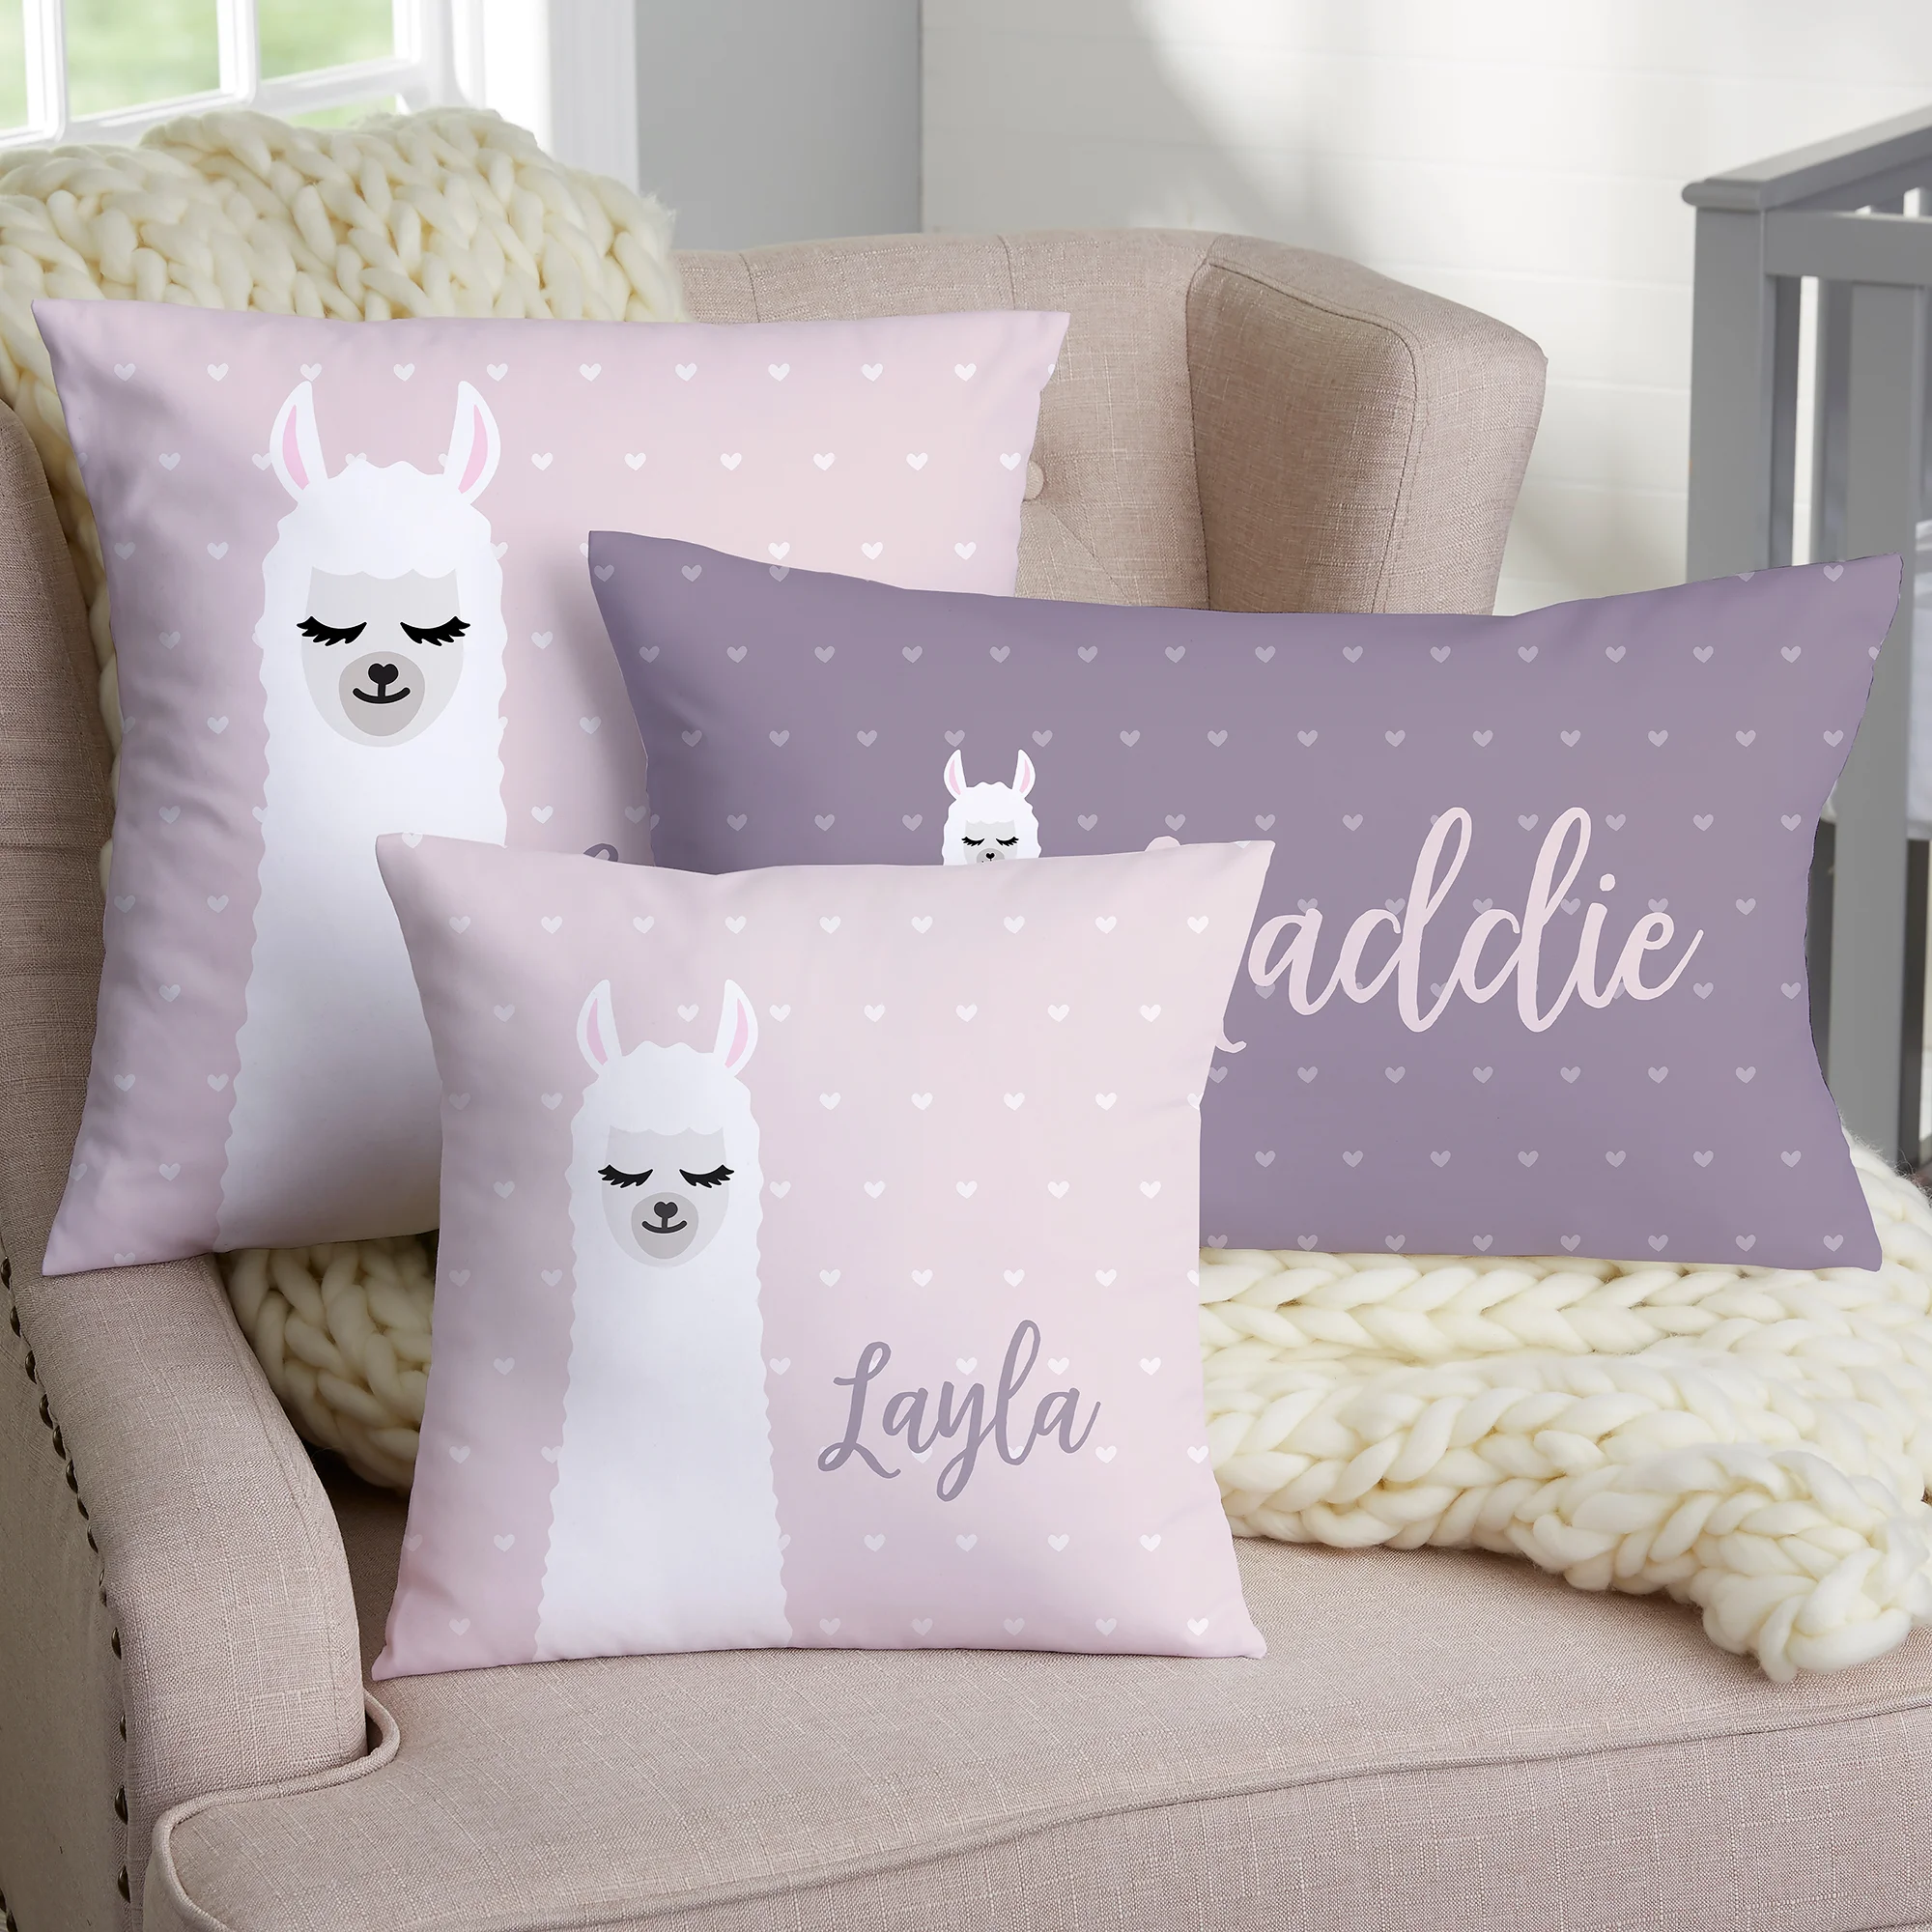 personalized-baby-gifts-pillows